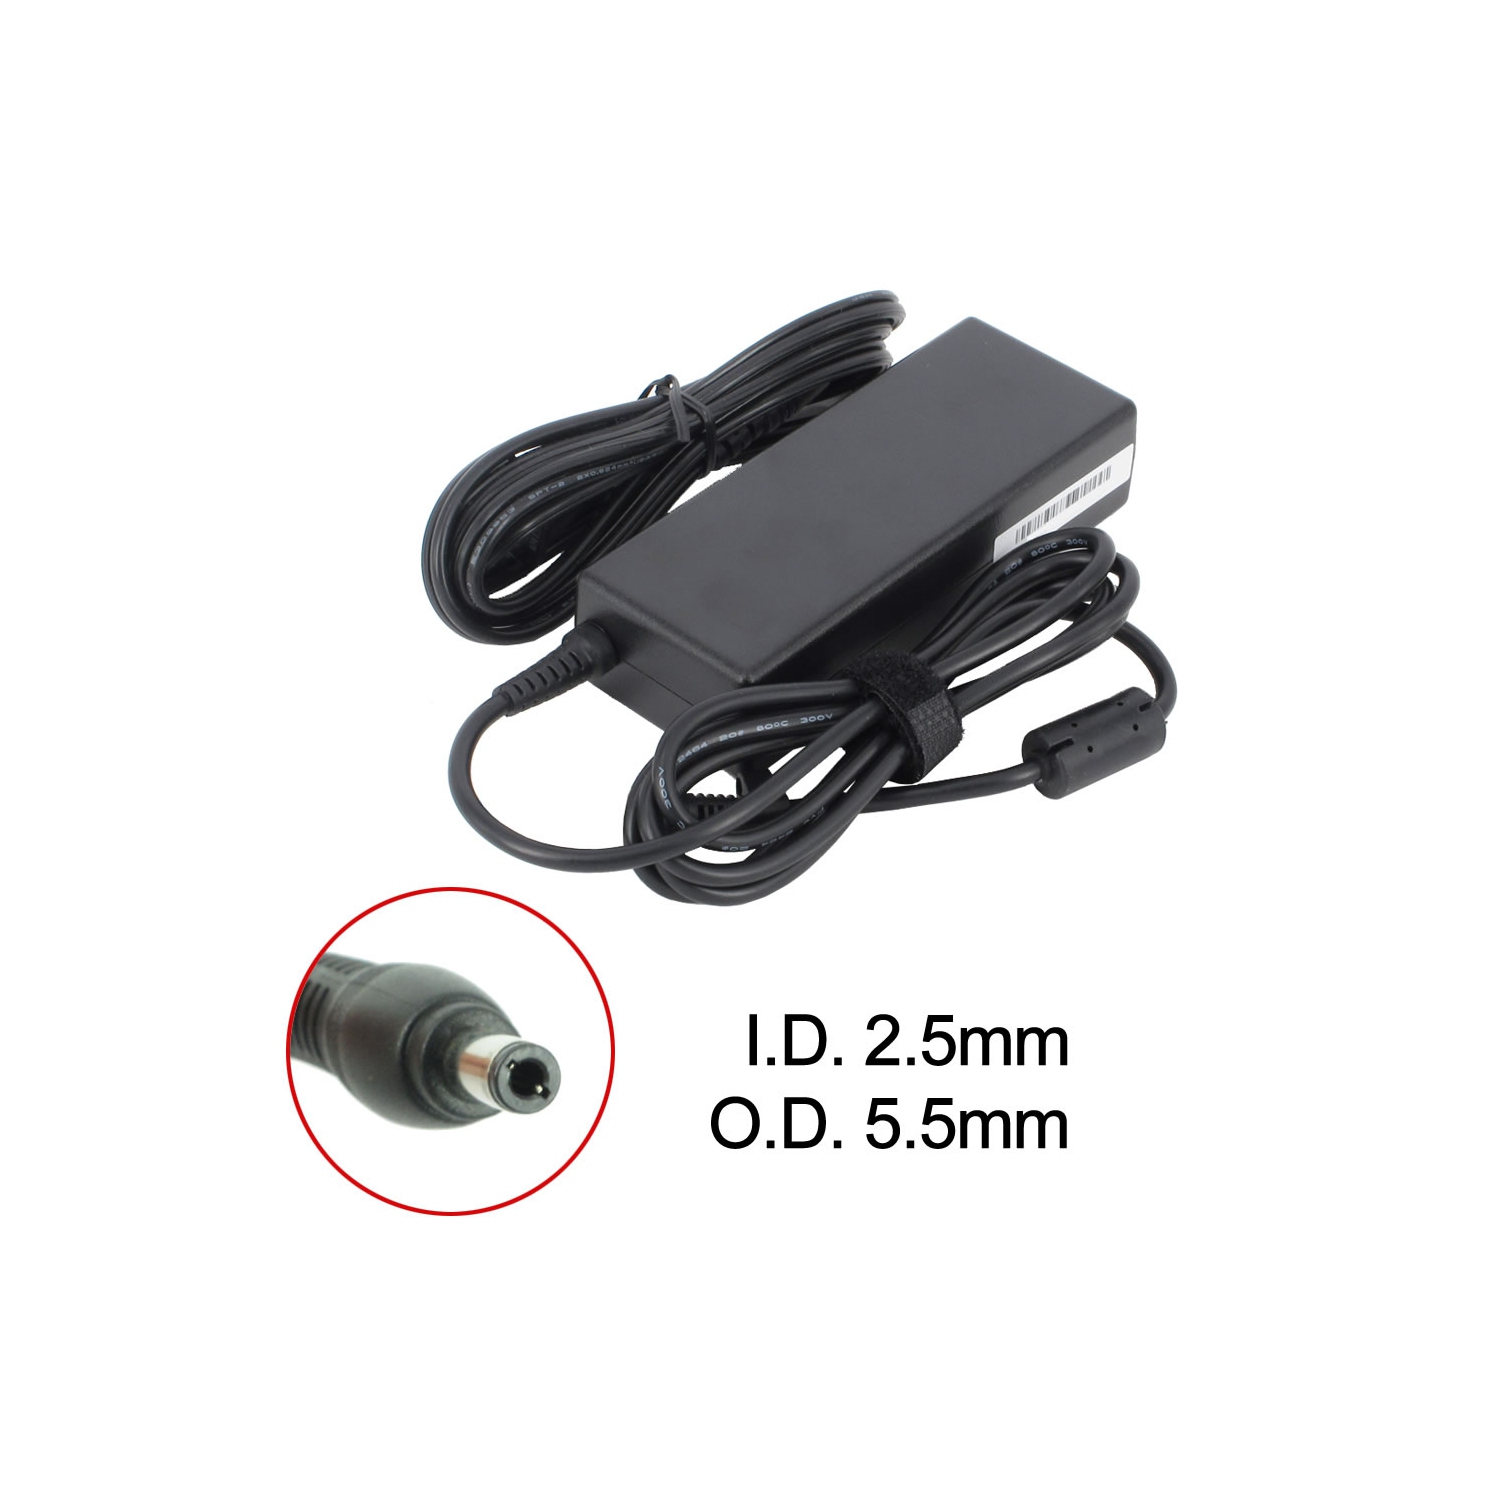 New Laptop AC Adapter for Lenovo IdeaPad Y480, 103942, 808-875692-010A, 9T458, ADP-65 HB BBEF, PA-1900-36, SA80-3115